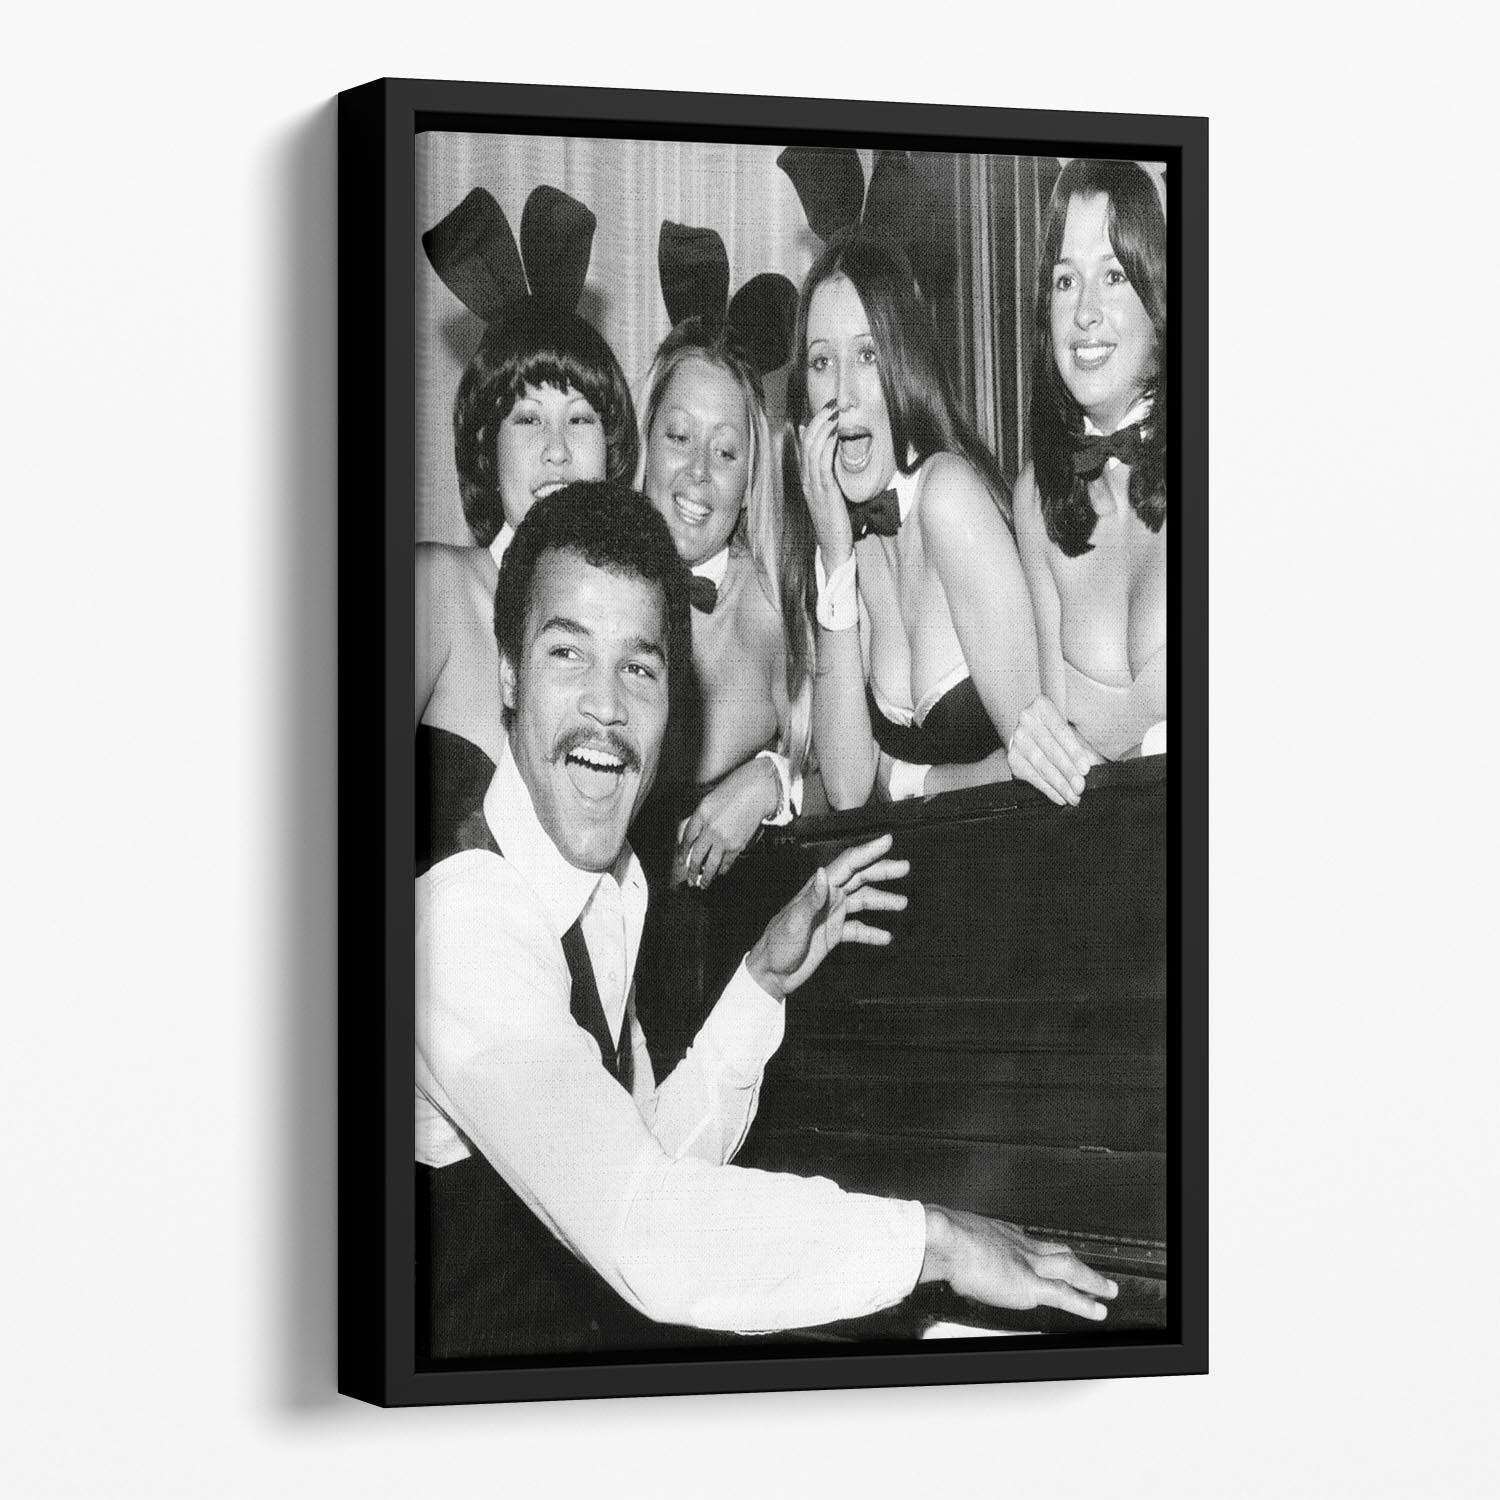 Boxer John Conteh with bunny girls at the playboy club Floating Framed Canvas - Canvas Art Rocks - 1